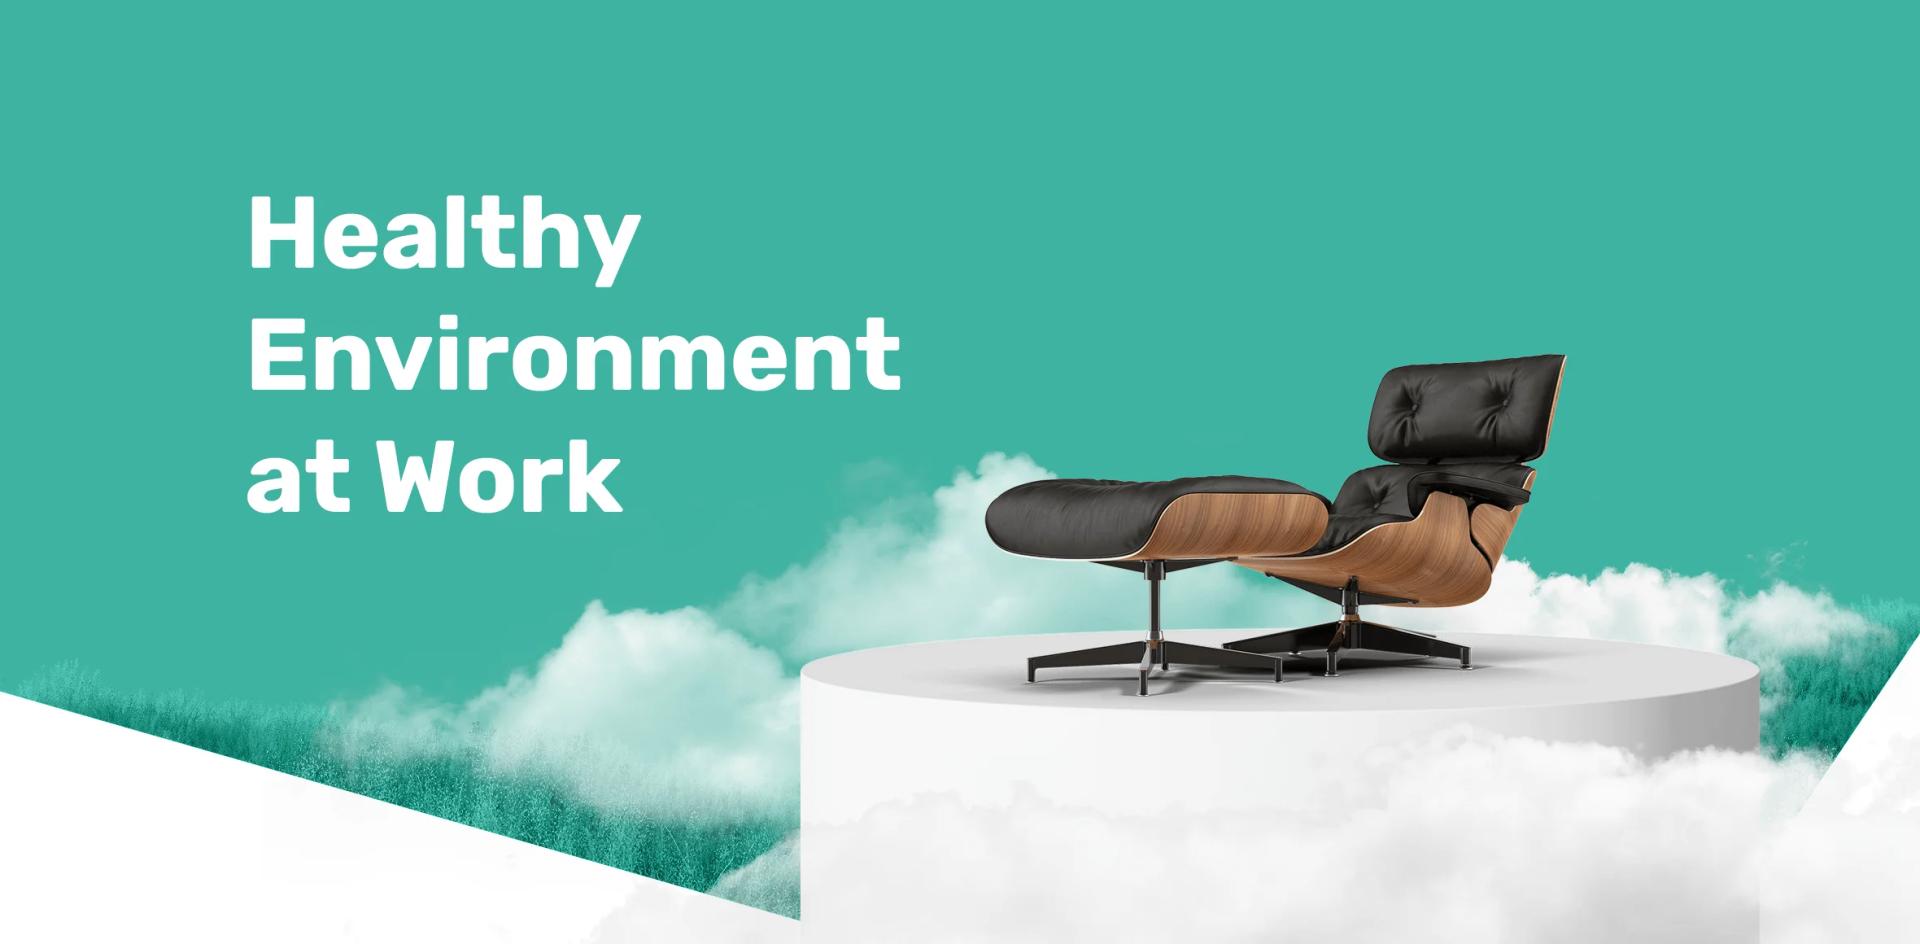 How to Create a Healthy Environment at Work